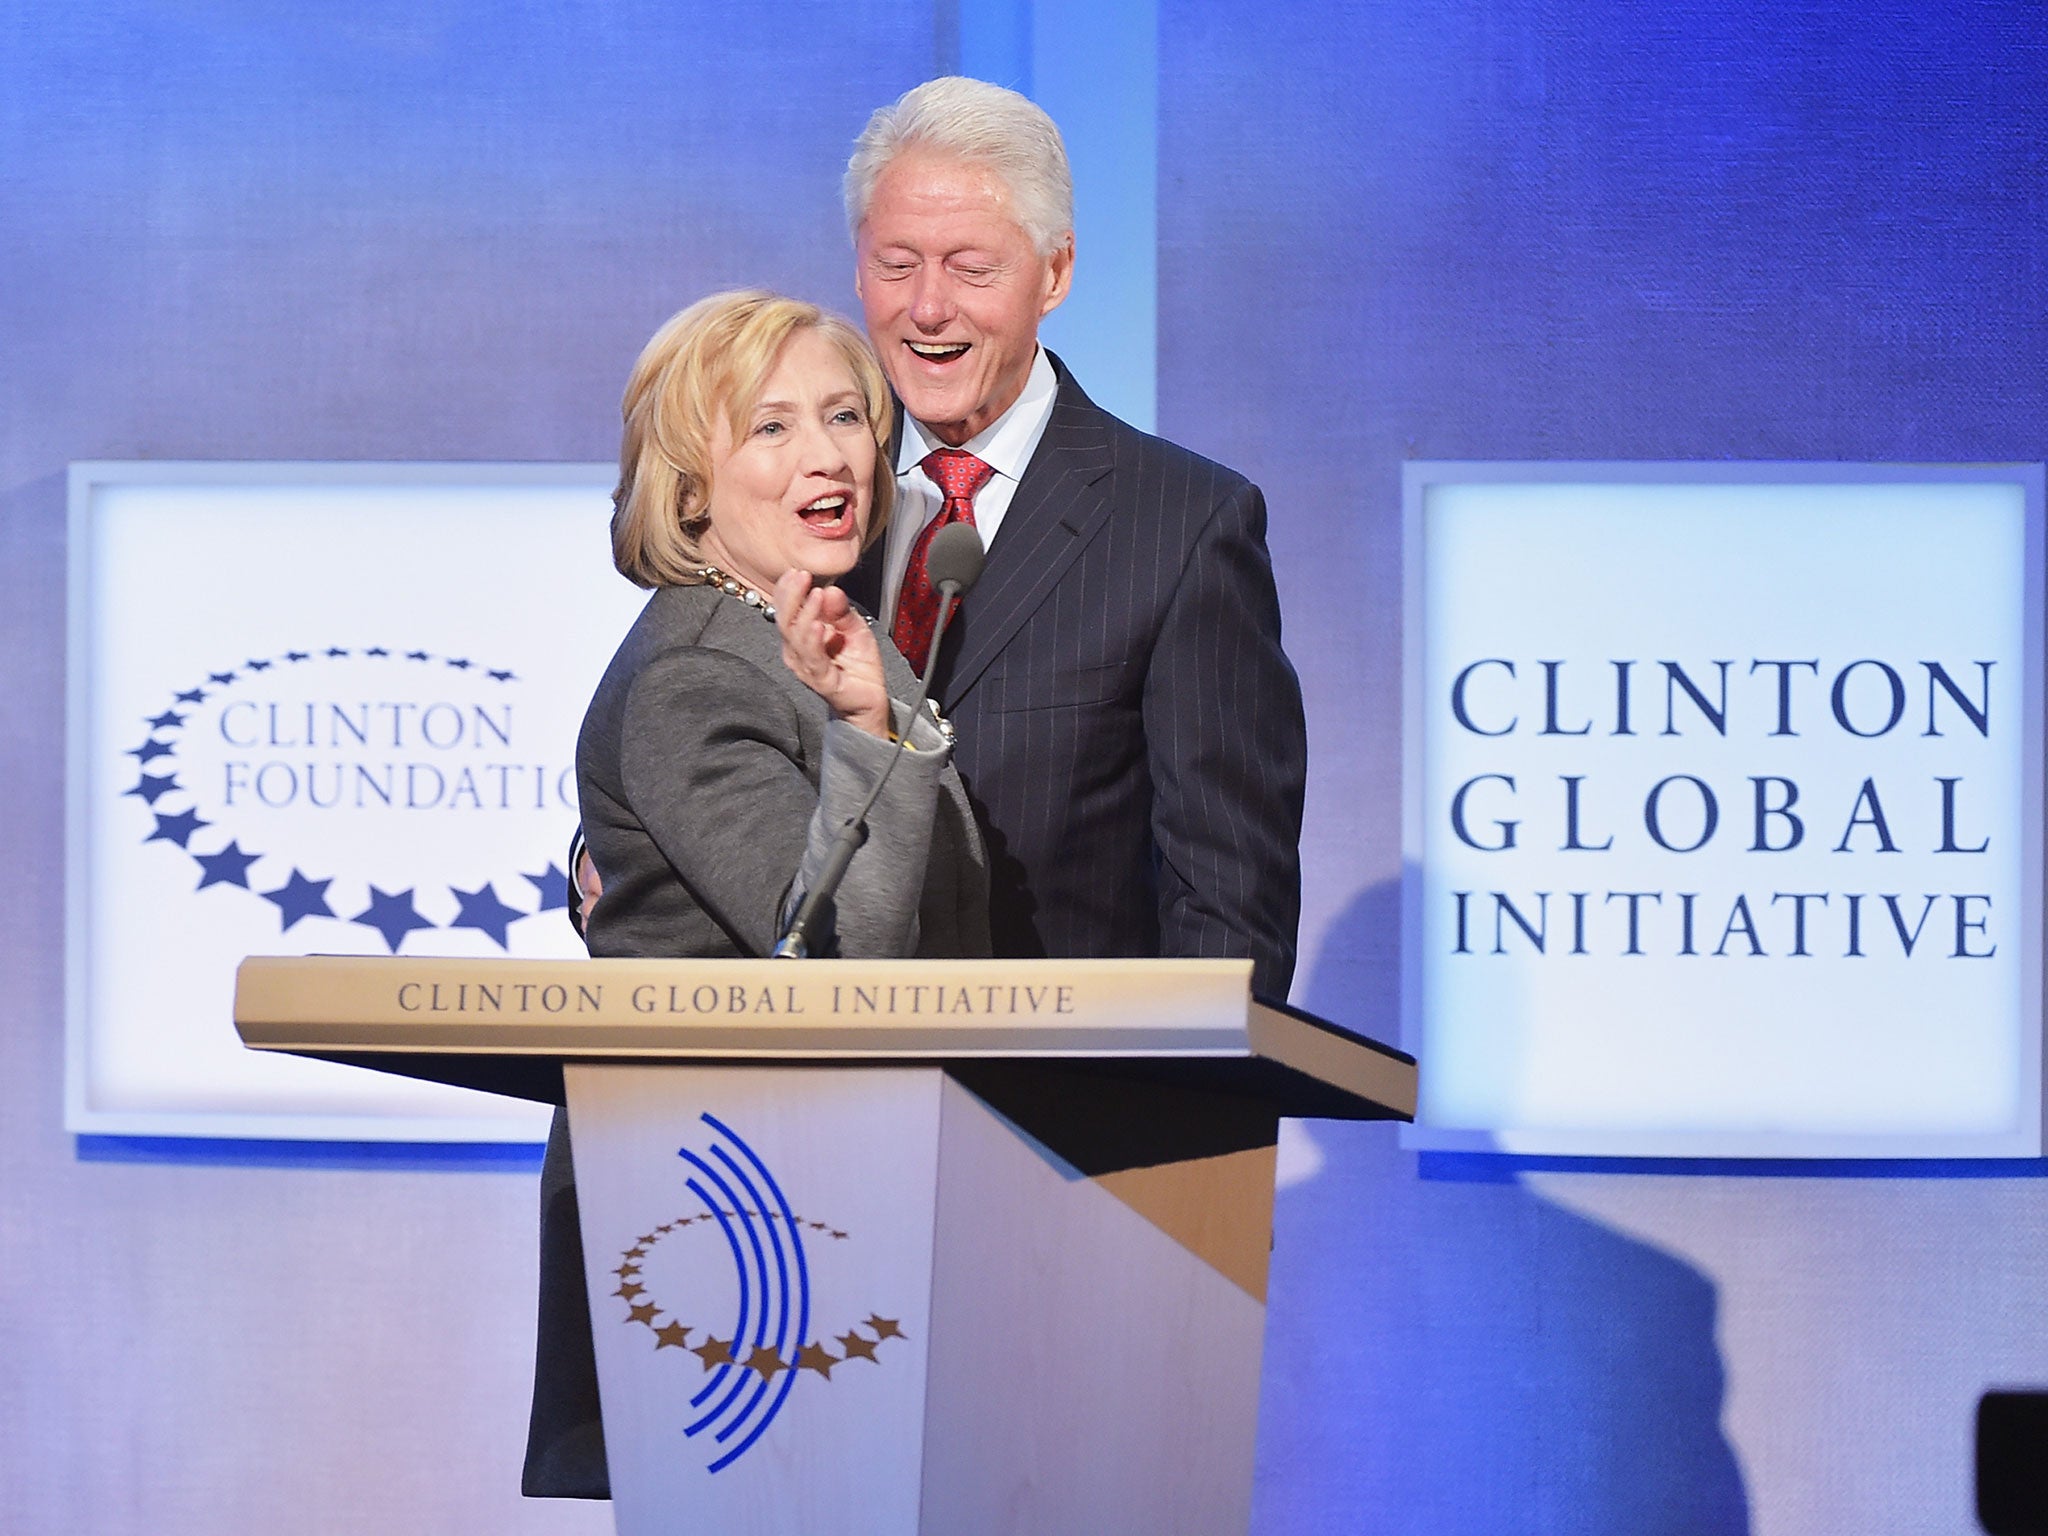 Bill and Hillary present the Clinton Global Initiative in New York